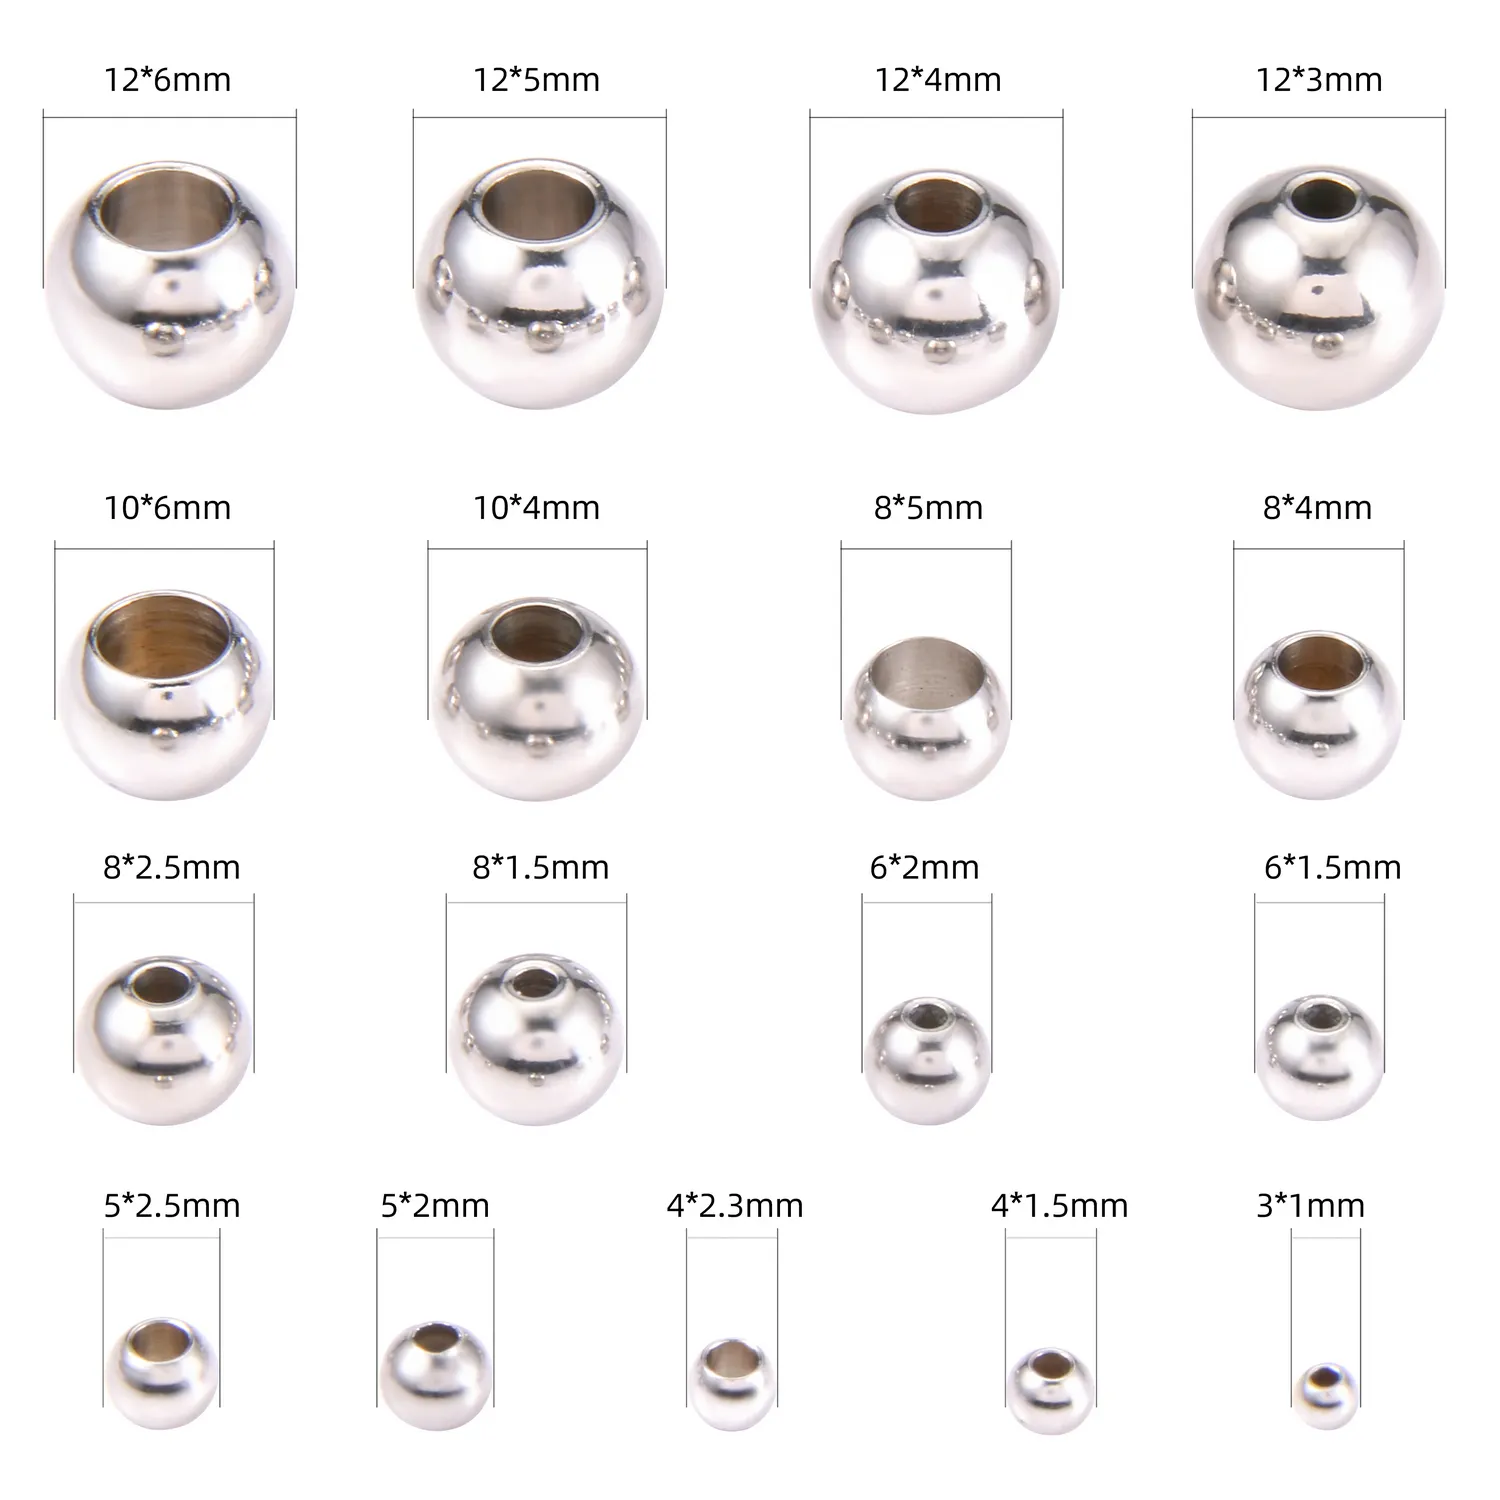 3-12mm Stainless Steel Round Beads European Ball Metal Big Hole Spacer Beads For Jewelry Making DIY Bracelet Necklace